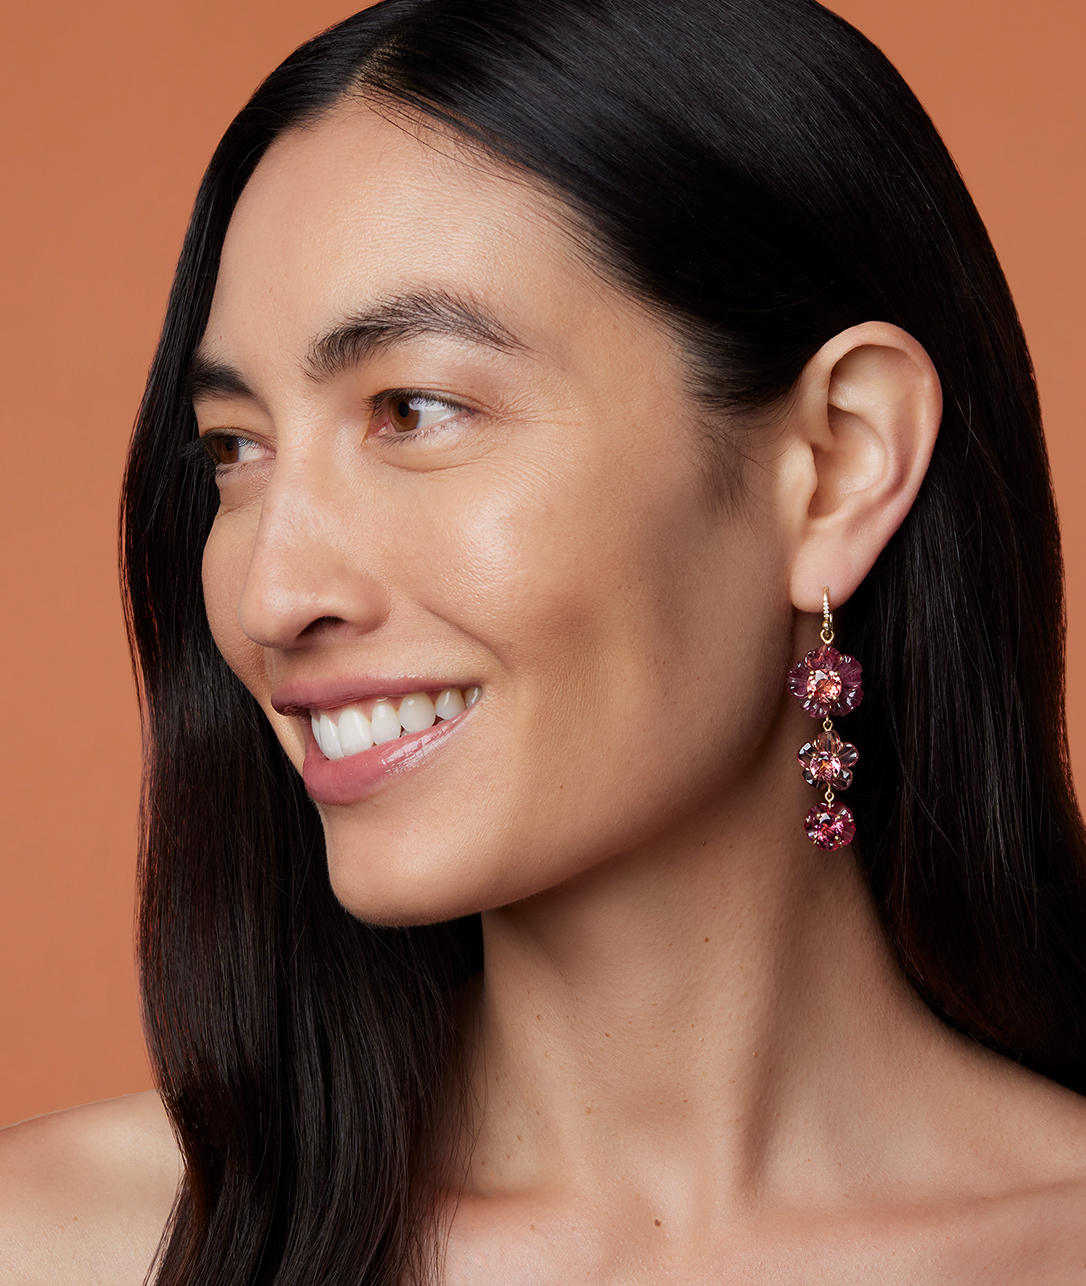 Like a daisy chain, only ultra-fine: tourmaline blooms linked together as drop earrings.SHOP TROPICAL FLOWER EARRINGS